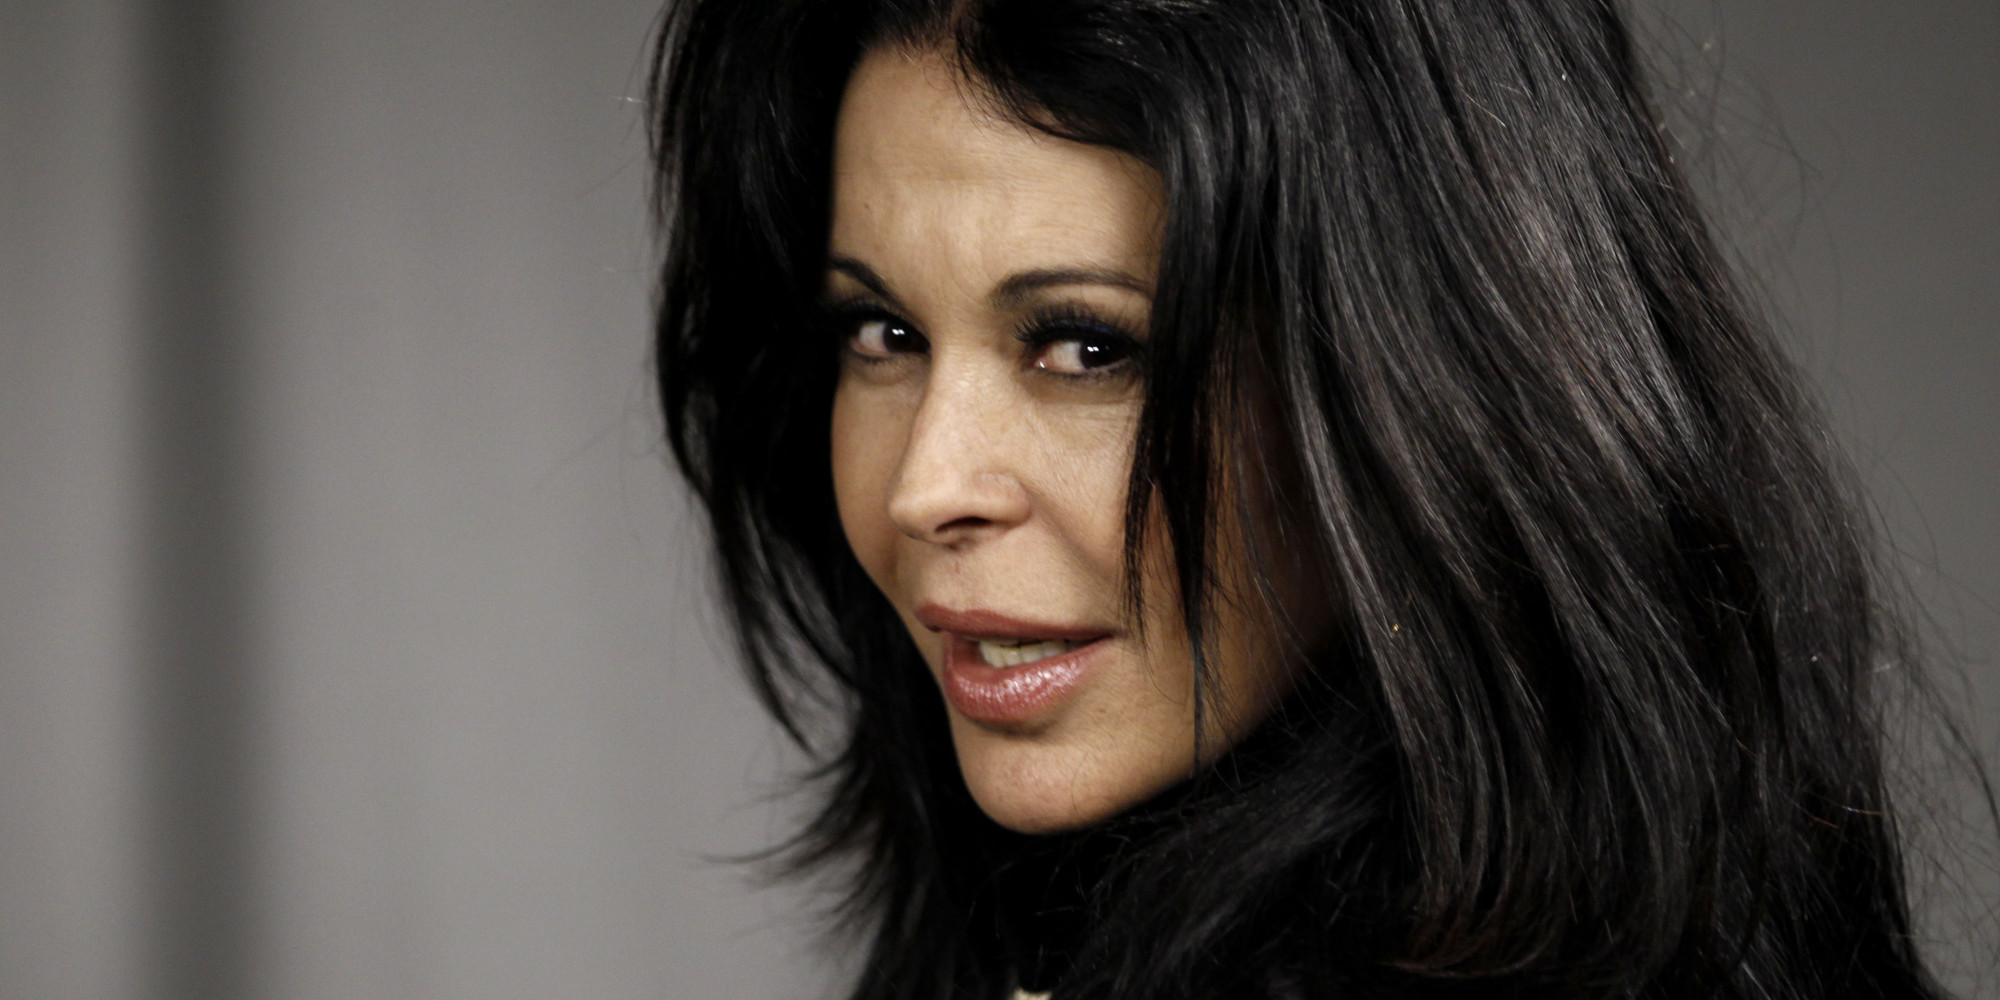 Actress Maria Conchita Alonso poses for a portrait in Los Angeles, Wednesday, July 7, 2010. (AP Photo/Matt Sayles)